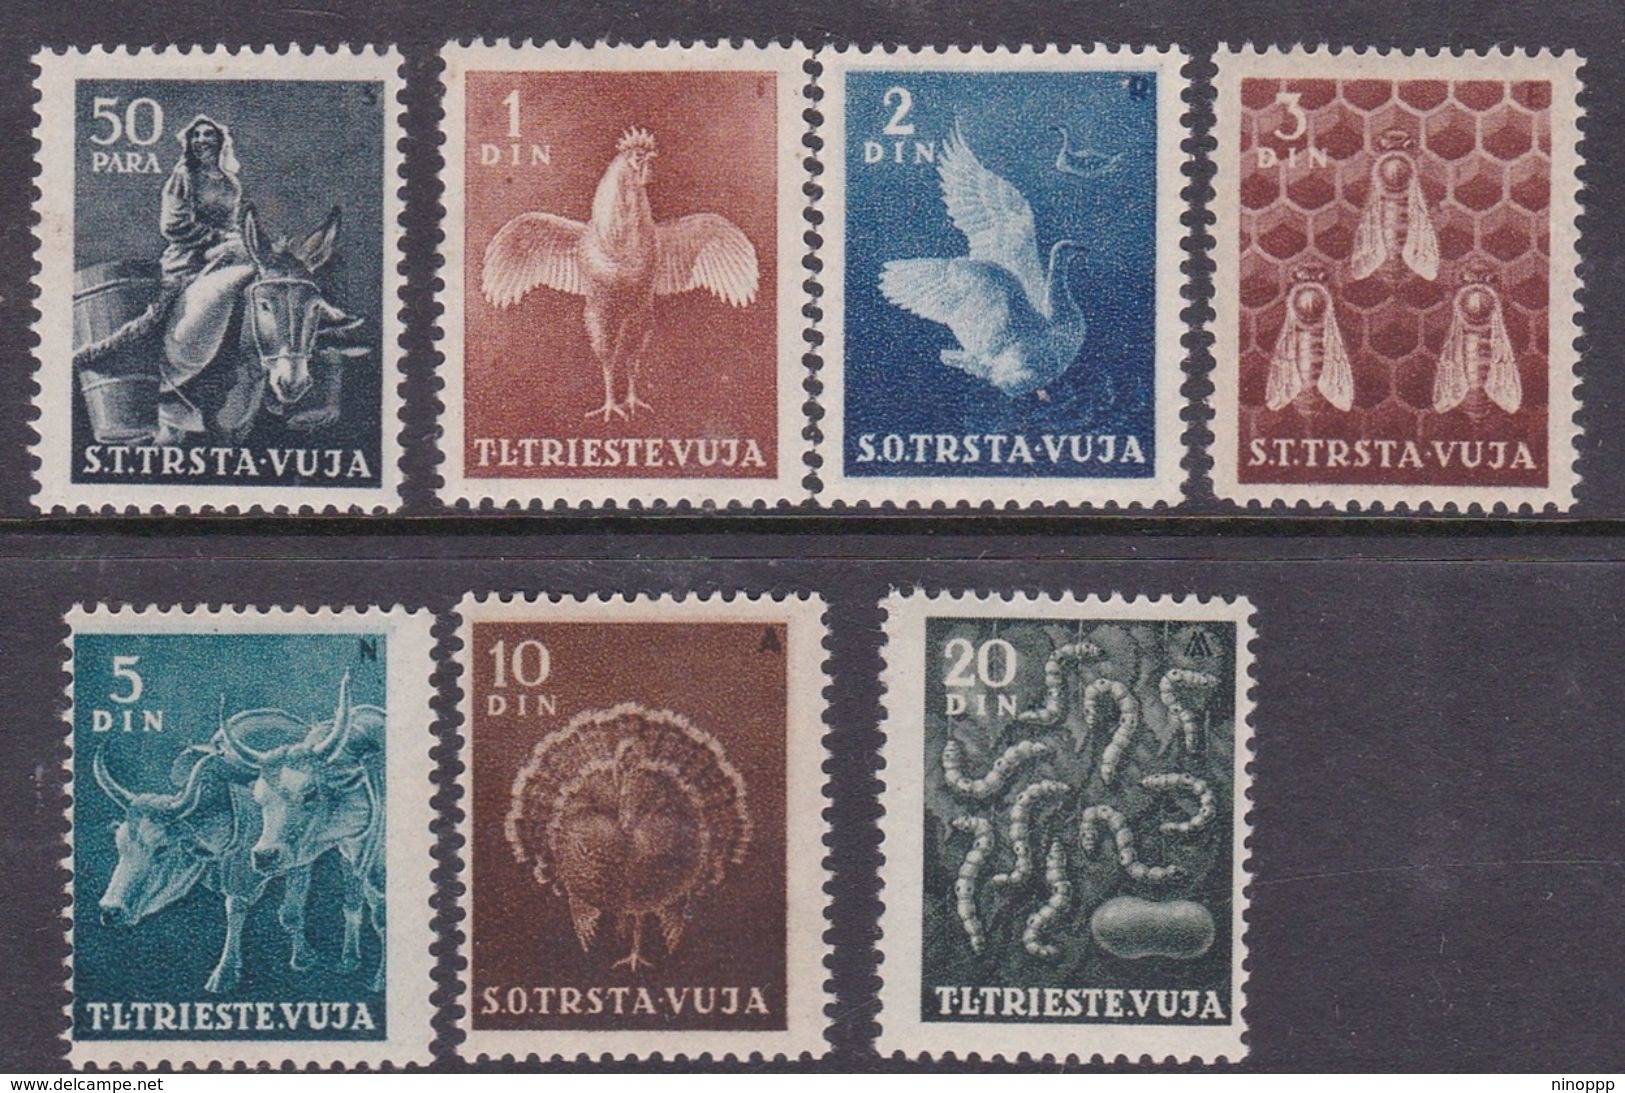 Italy Trieste B Yugoslav Occupation S 23-30 1950 Domestic Animals Mint Never Hinged - Mint/hinged